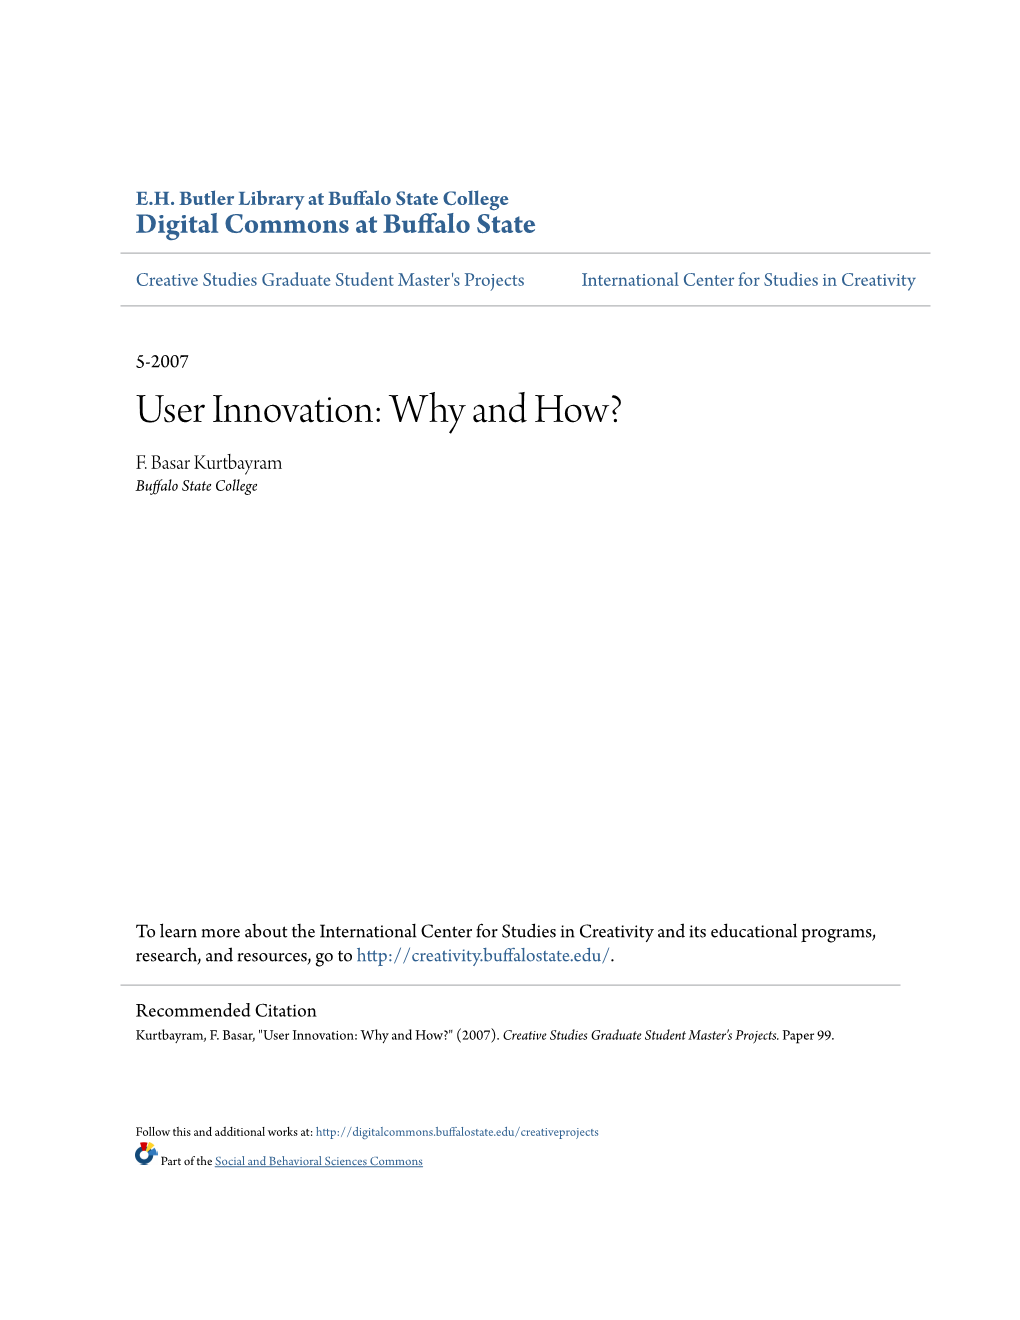 User Innovation: Why and How? F